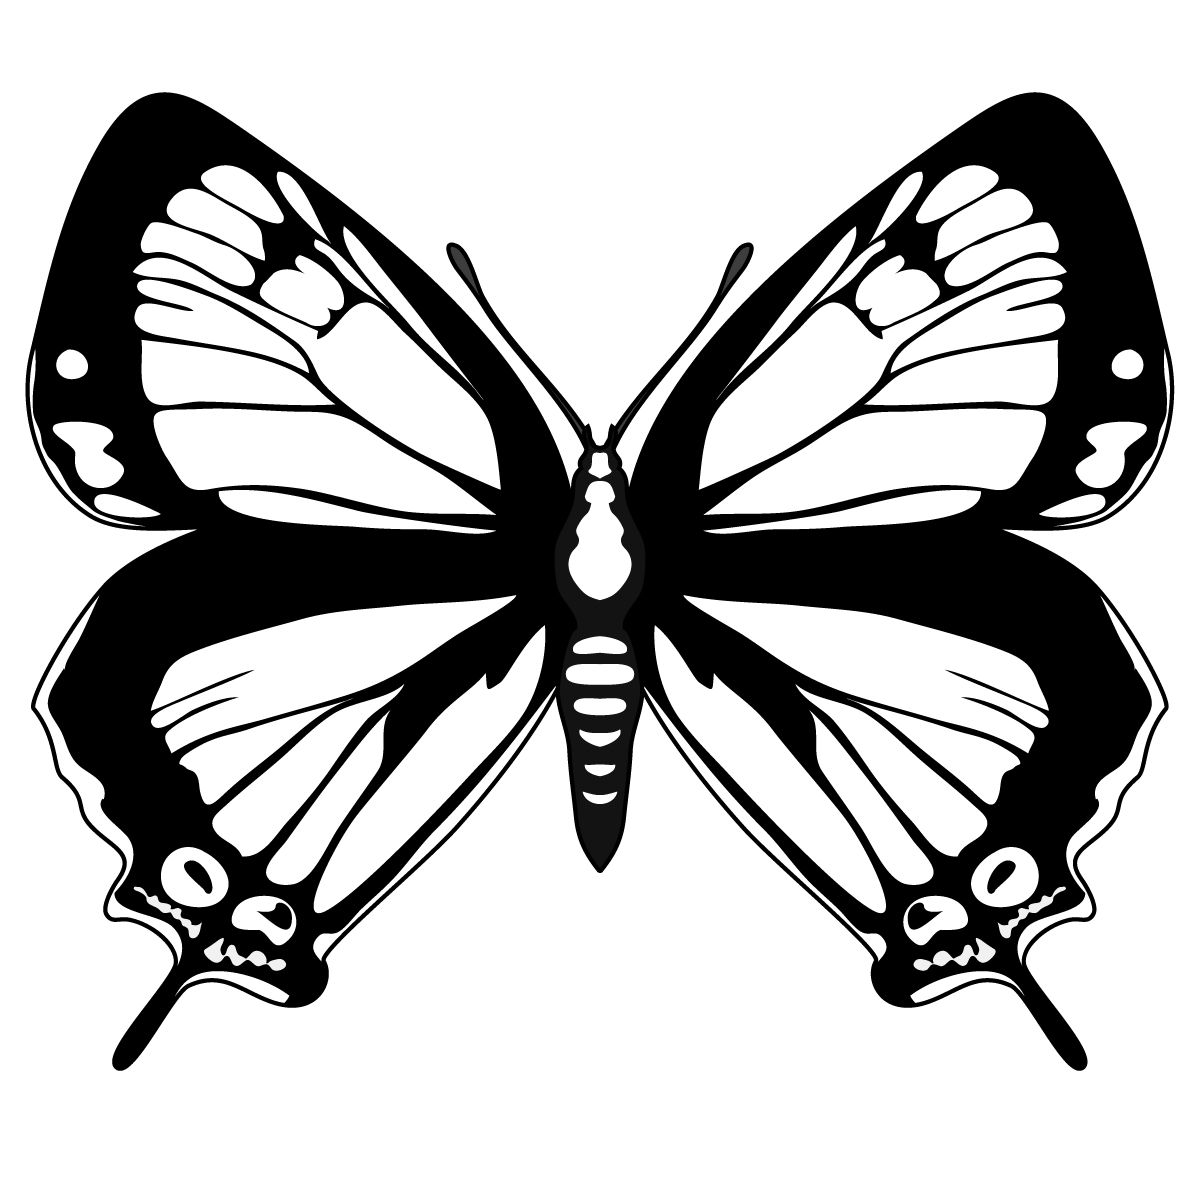 Butterfly Drawing With Details - Clipart library